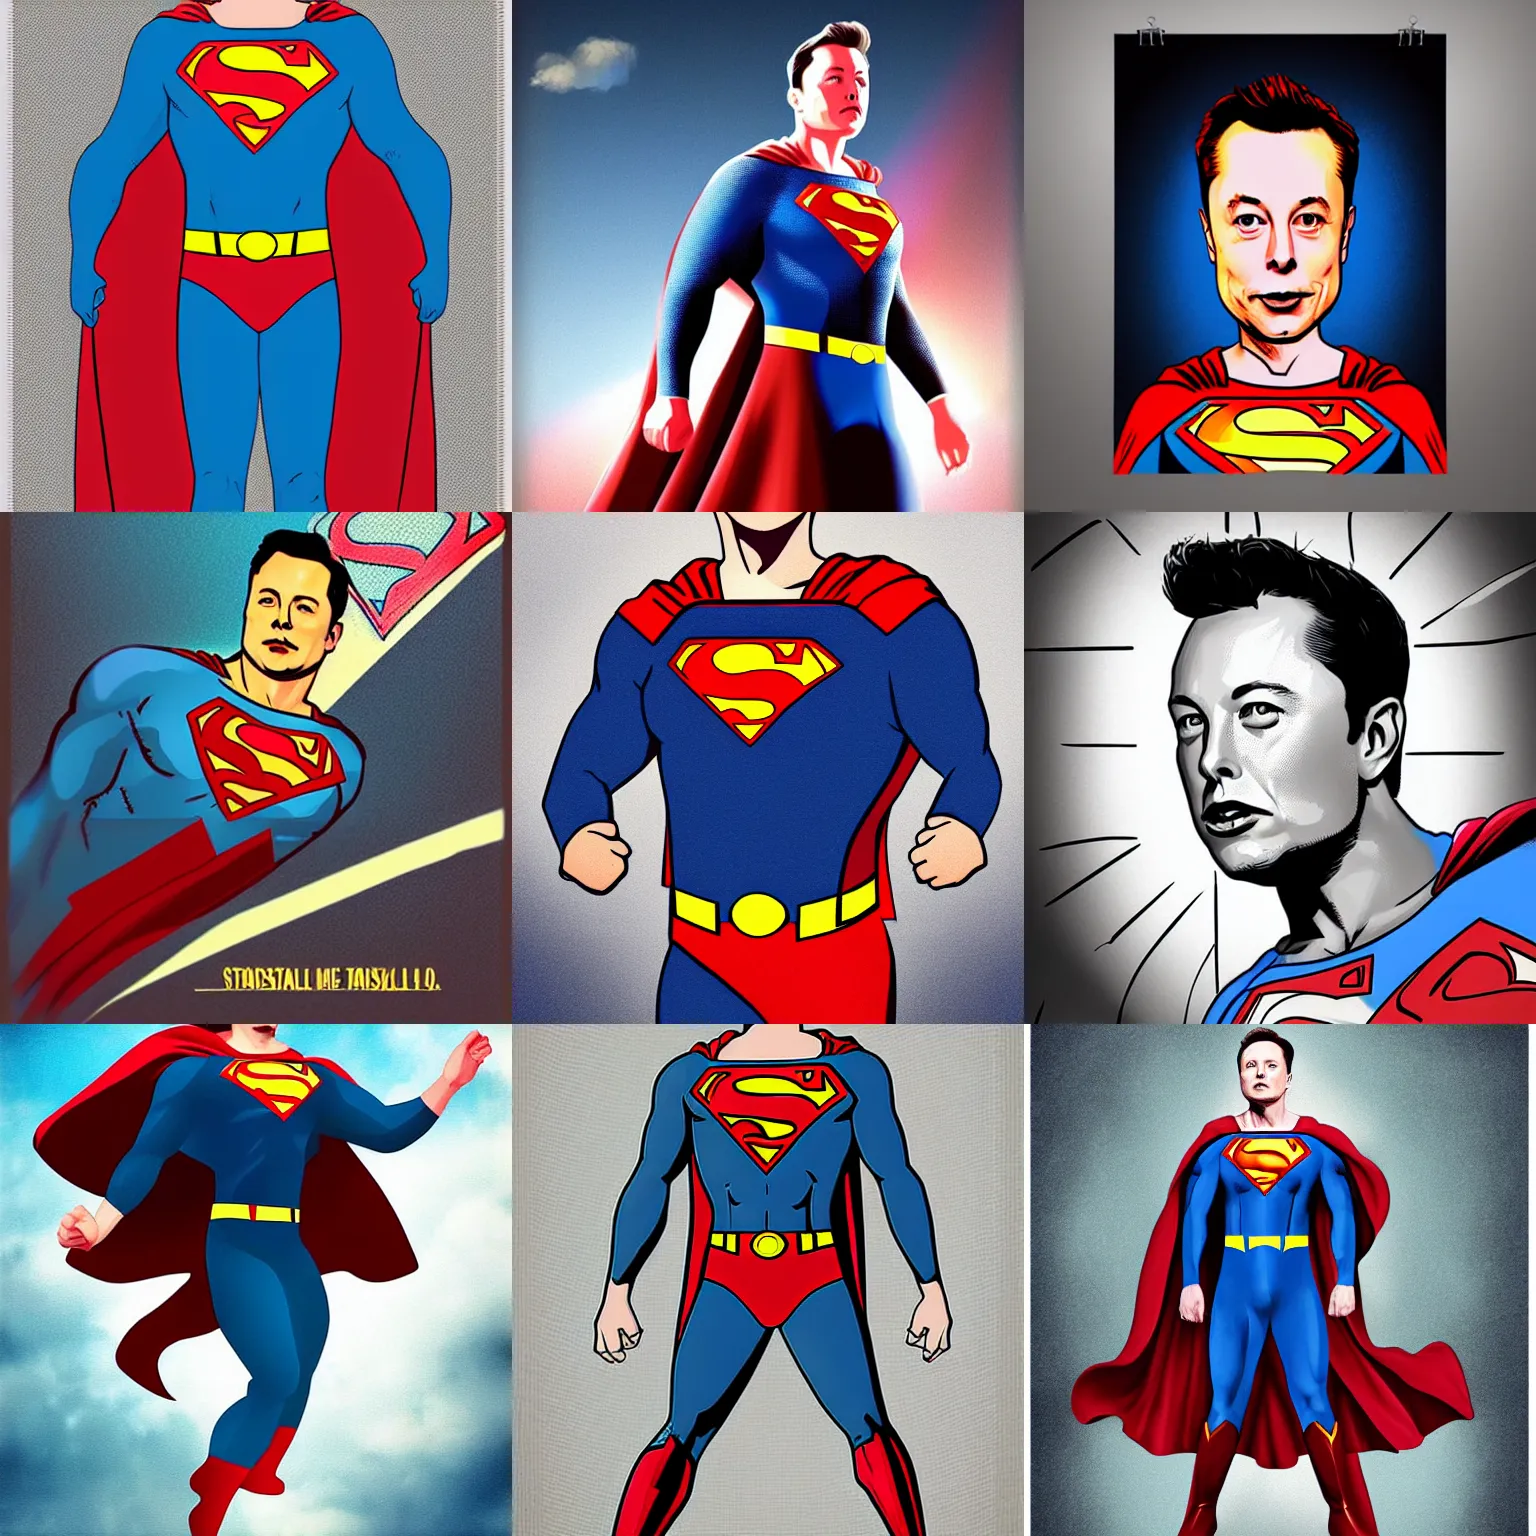 Prompt: “realistic illustration poster Elon musk as Superman”